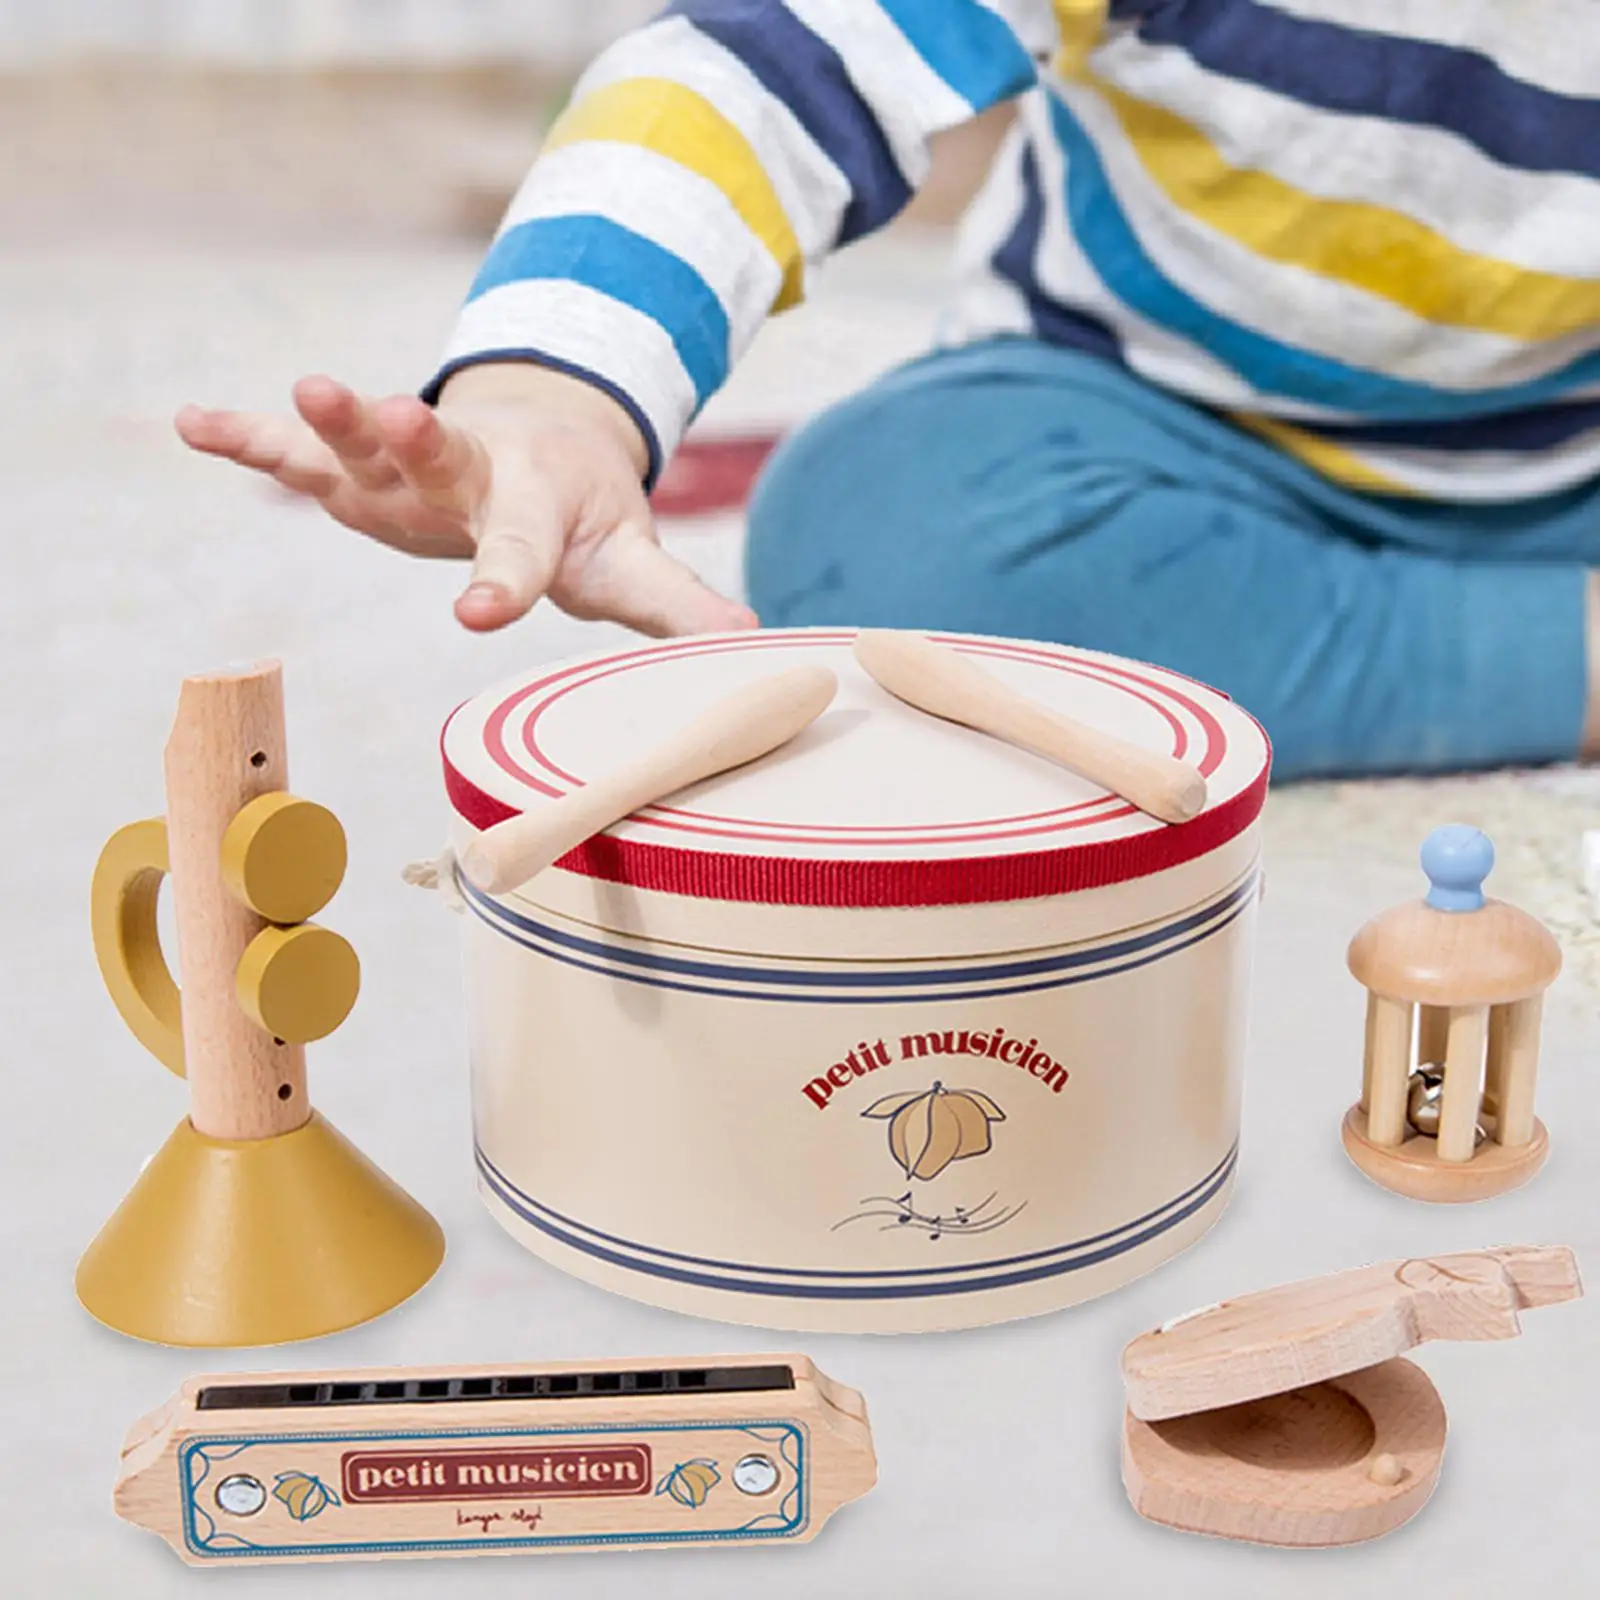 5 Pieces Kids Percussion Instrument Educational Baby Musical Toys Wooden Music Set for Volumes Tones Coordination Interaction